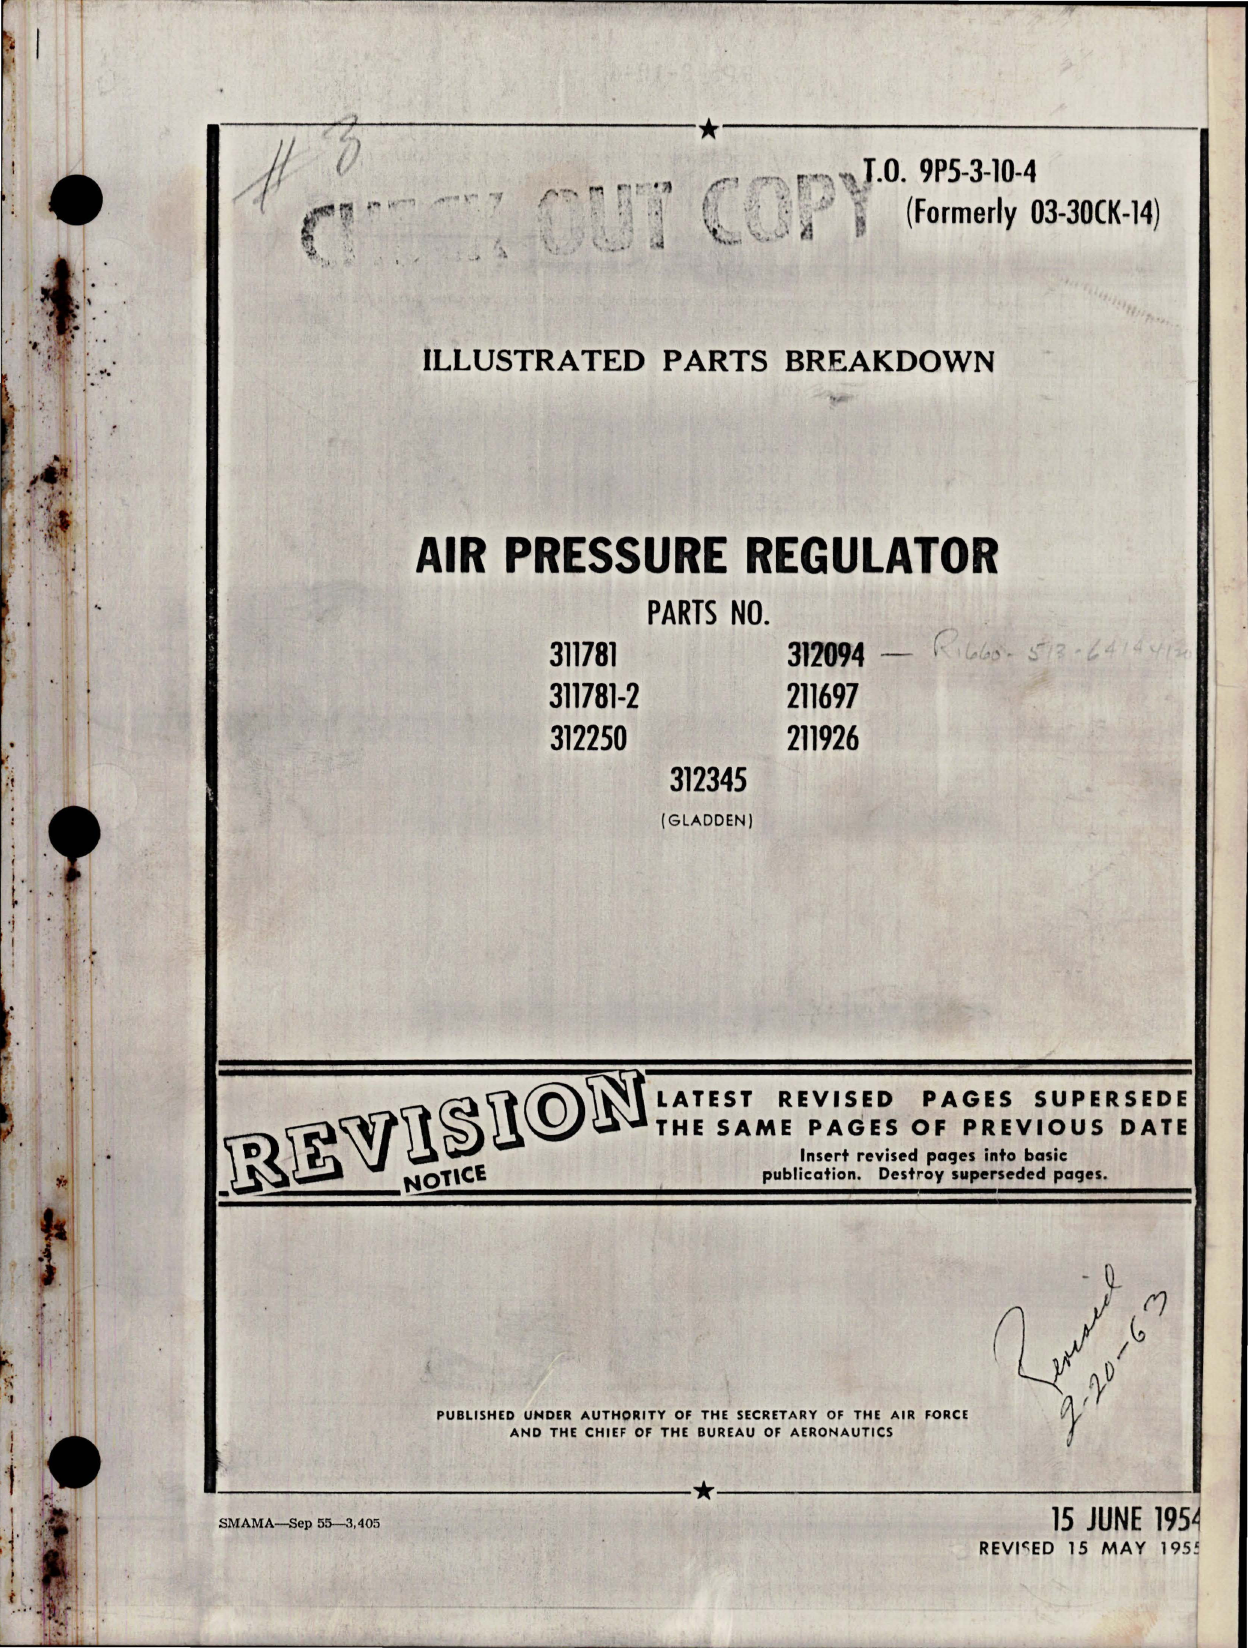 Sample page 1 from AirCorps Library document: Illustrated Parts Breakdown for Air Pressure Regulator 